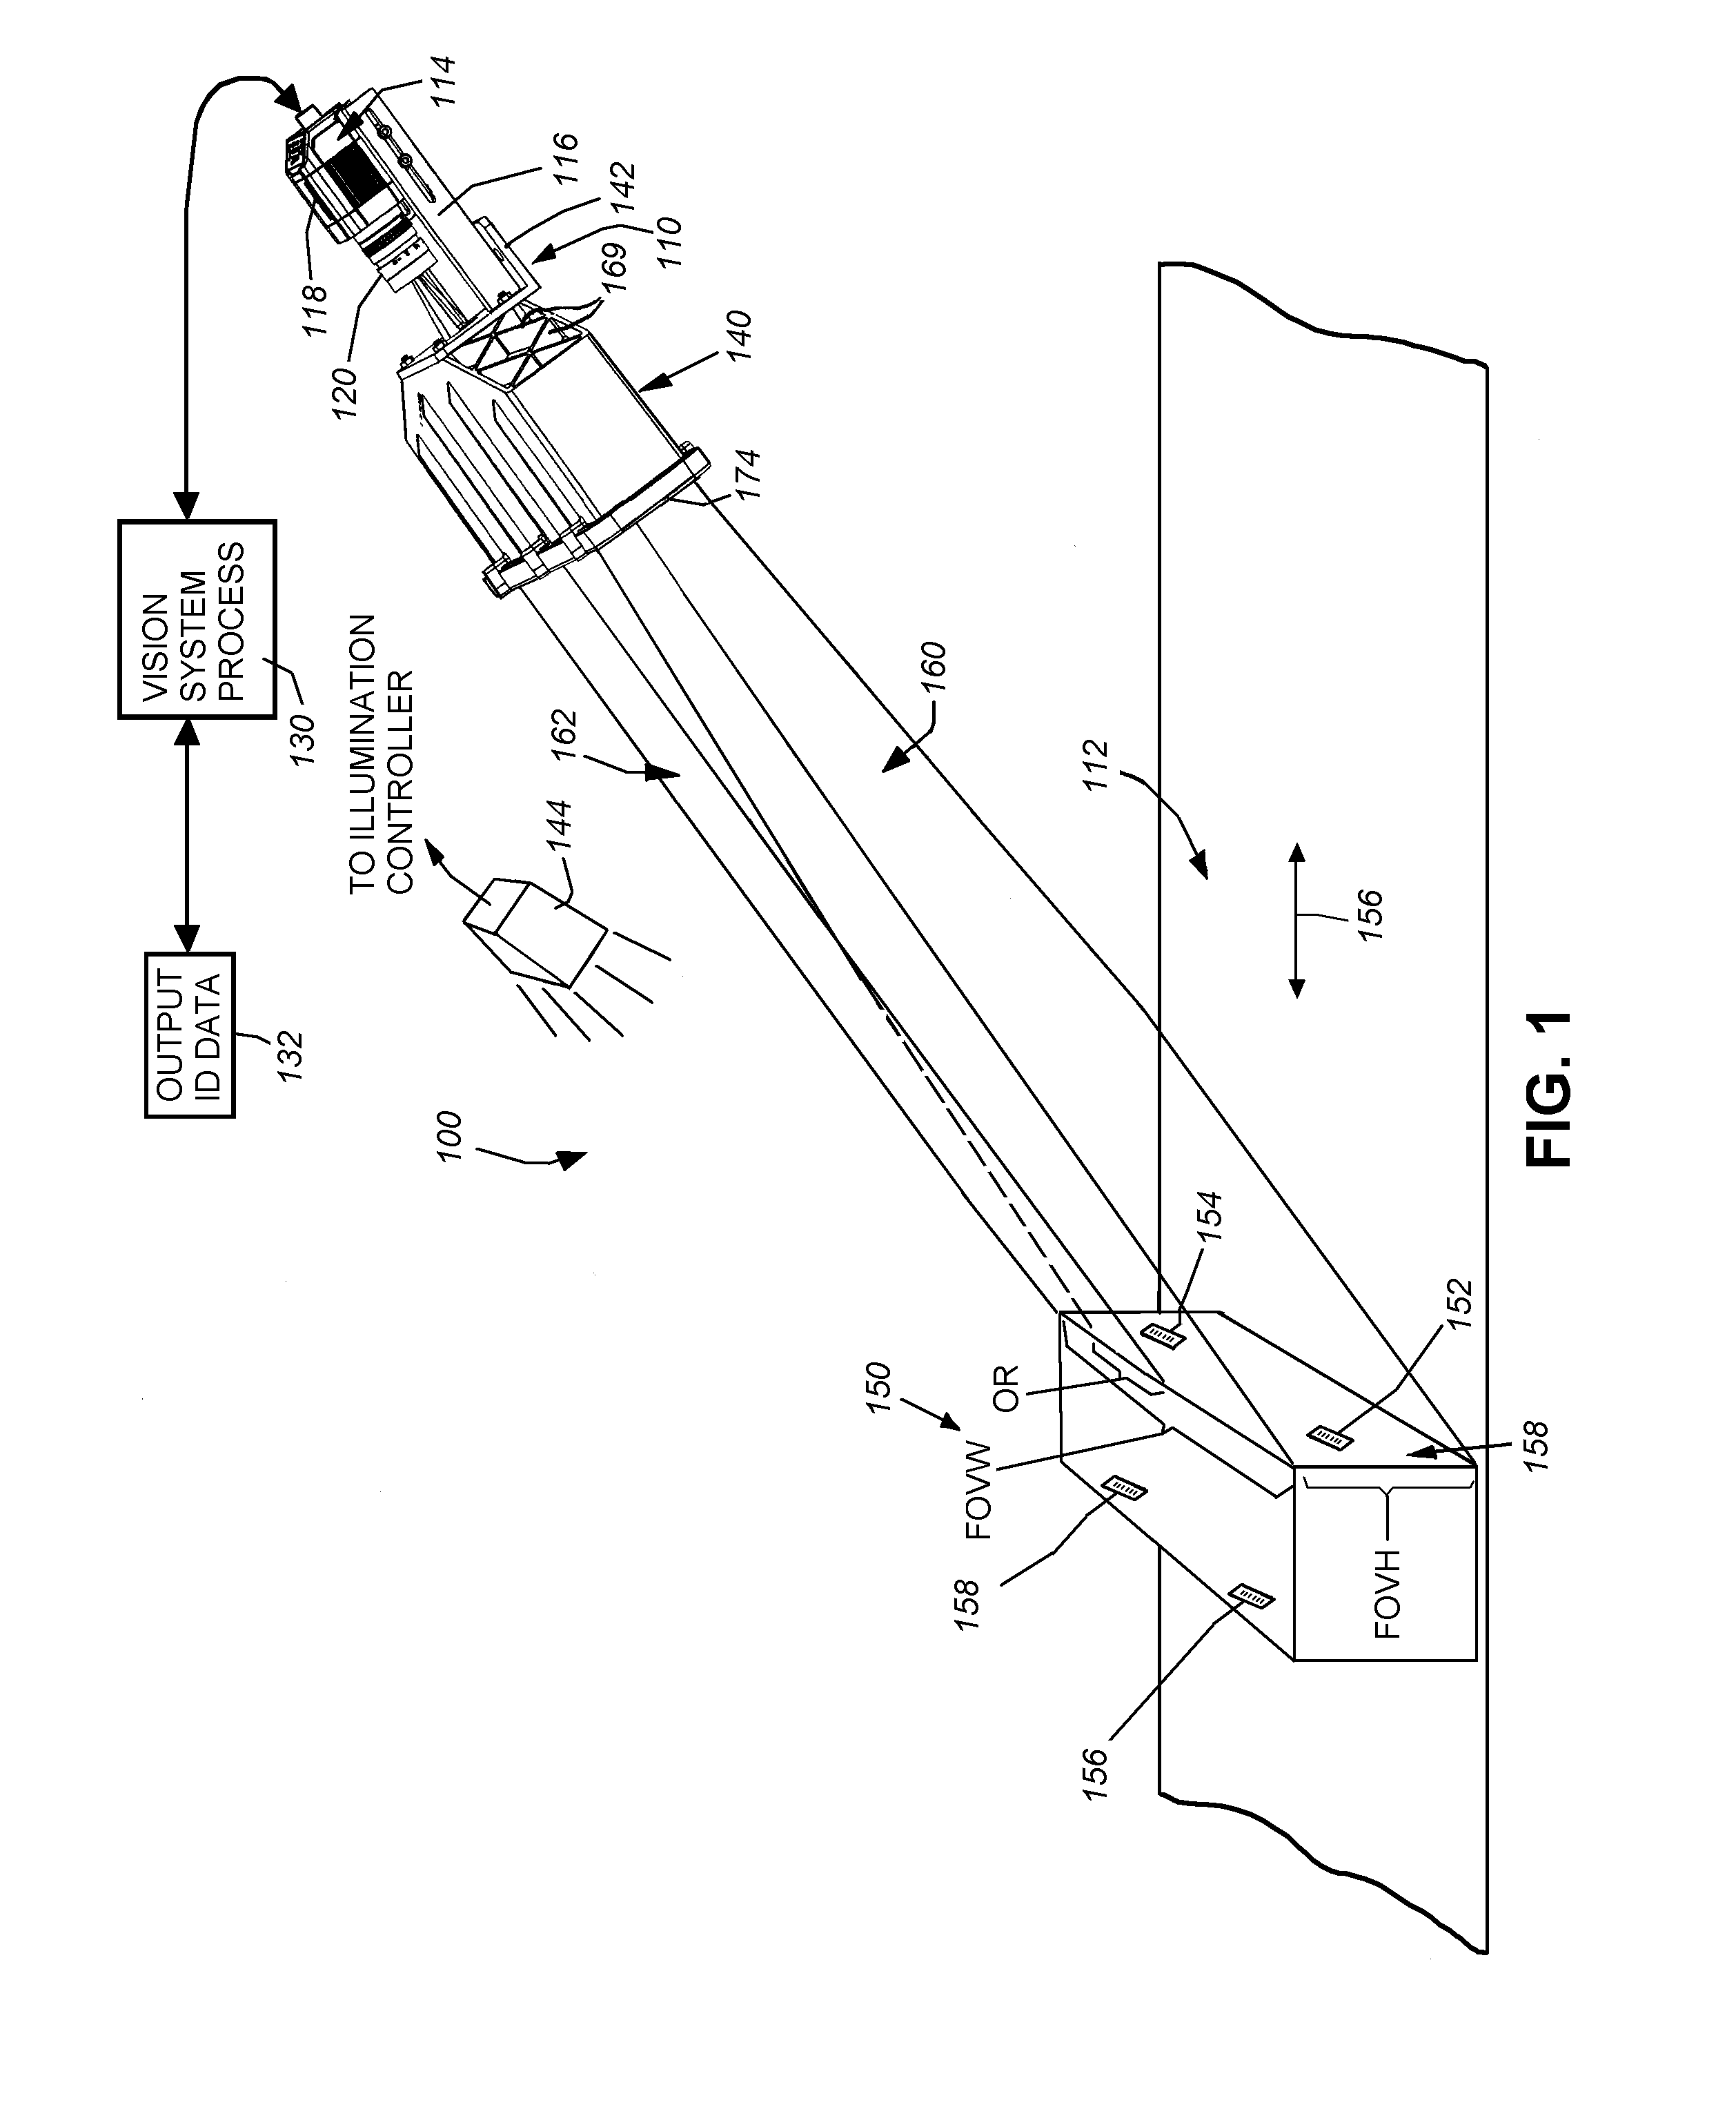 System and method for expansion of field of view in a vision system